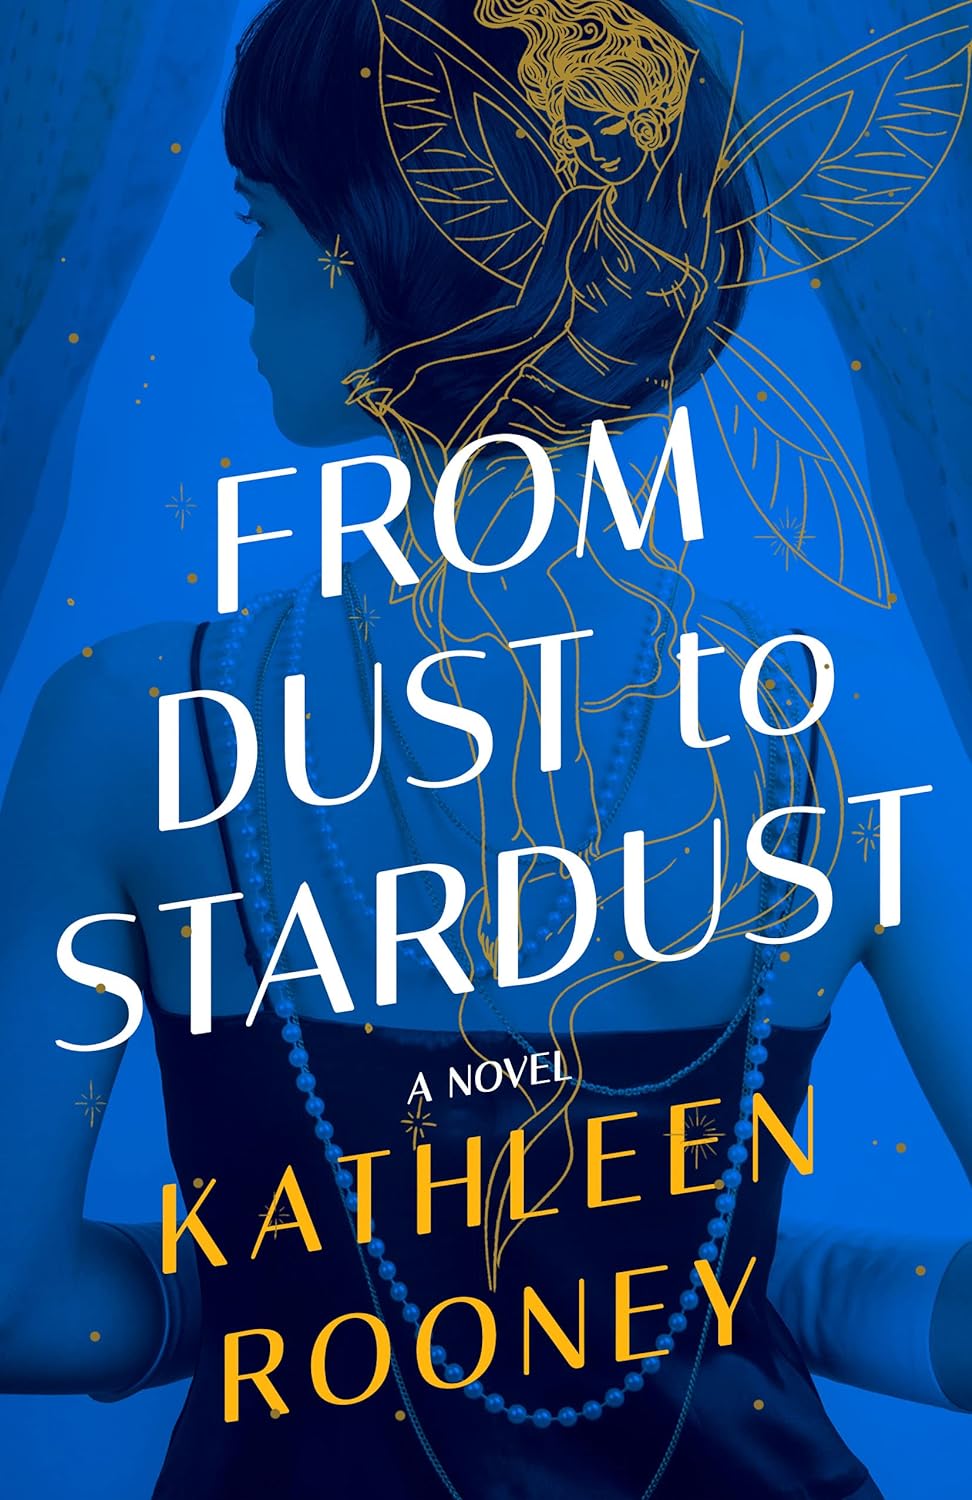 From Dust to Stardust [Kathleen Rooney]